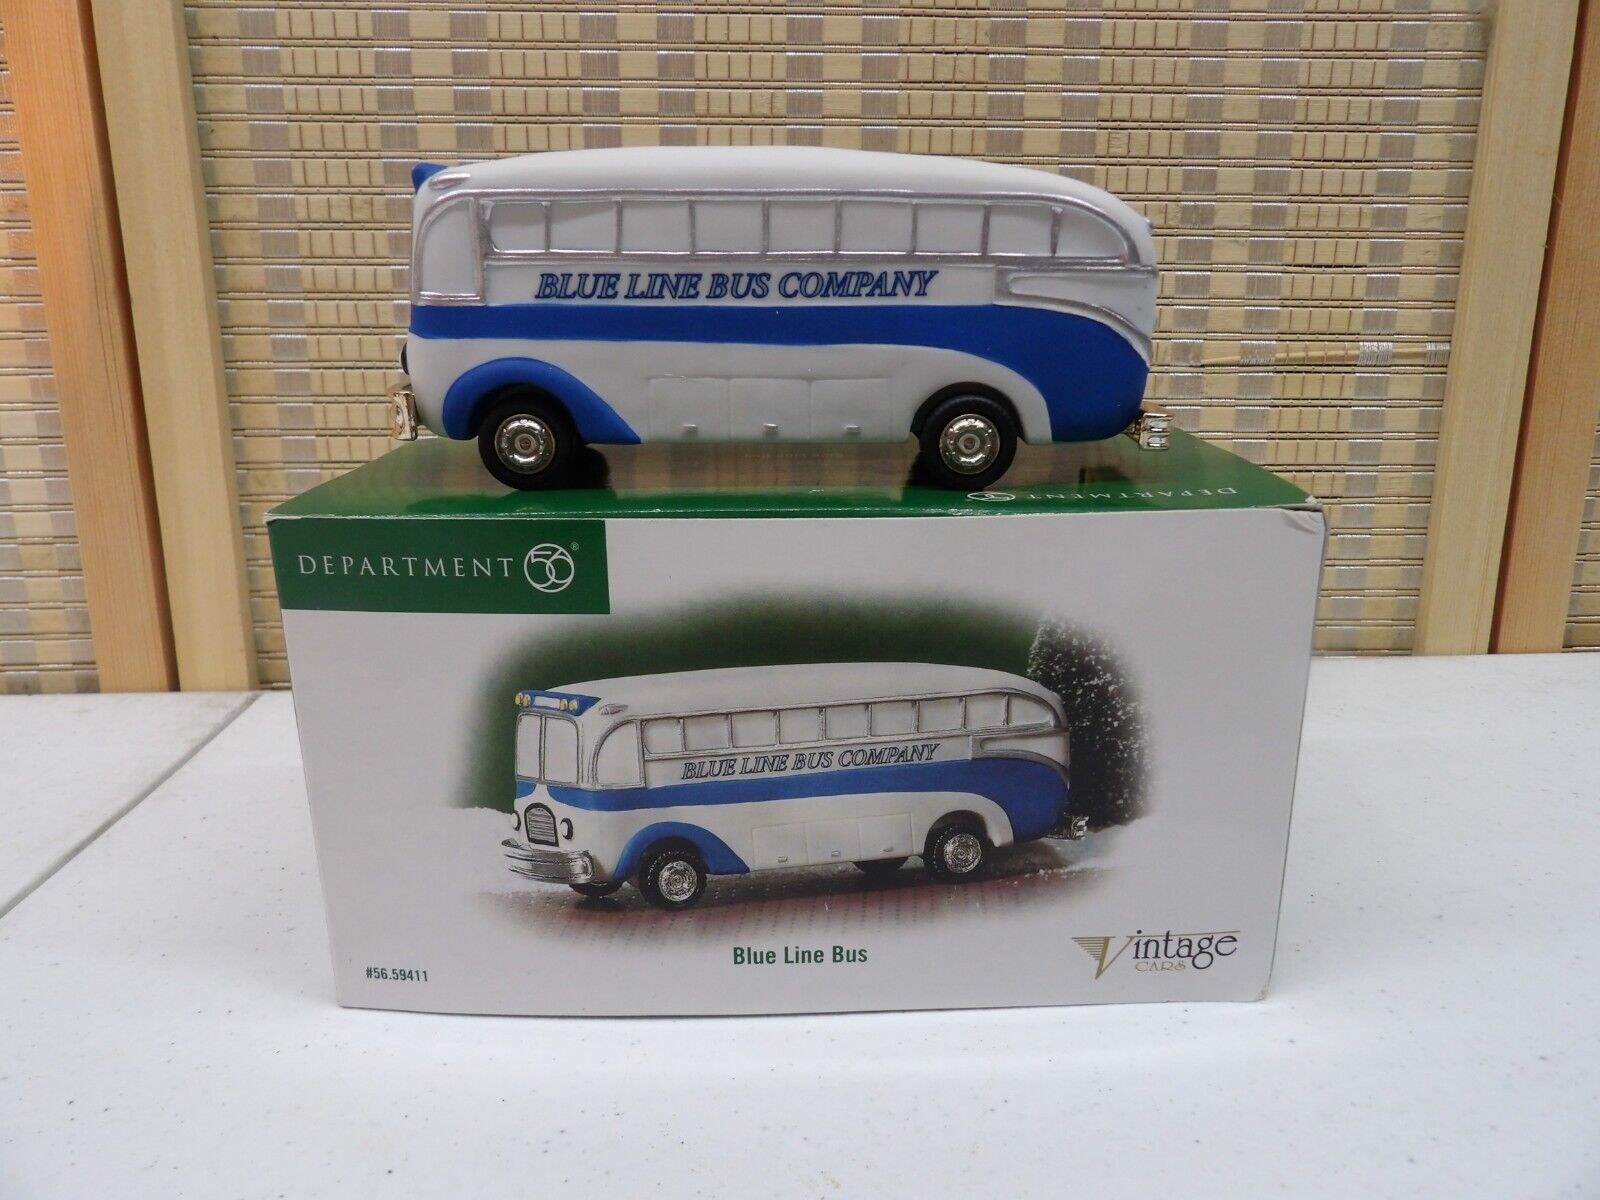 Dept. 56  Christmas In The City 2003 Vintage Cars Blue Line Bus #56.59411